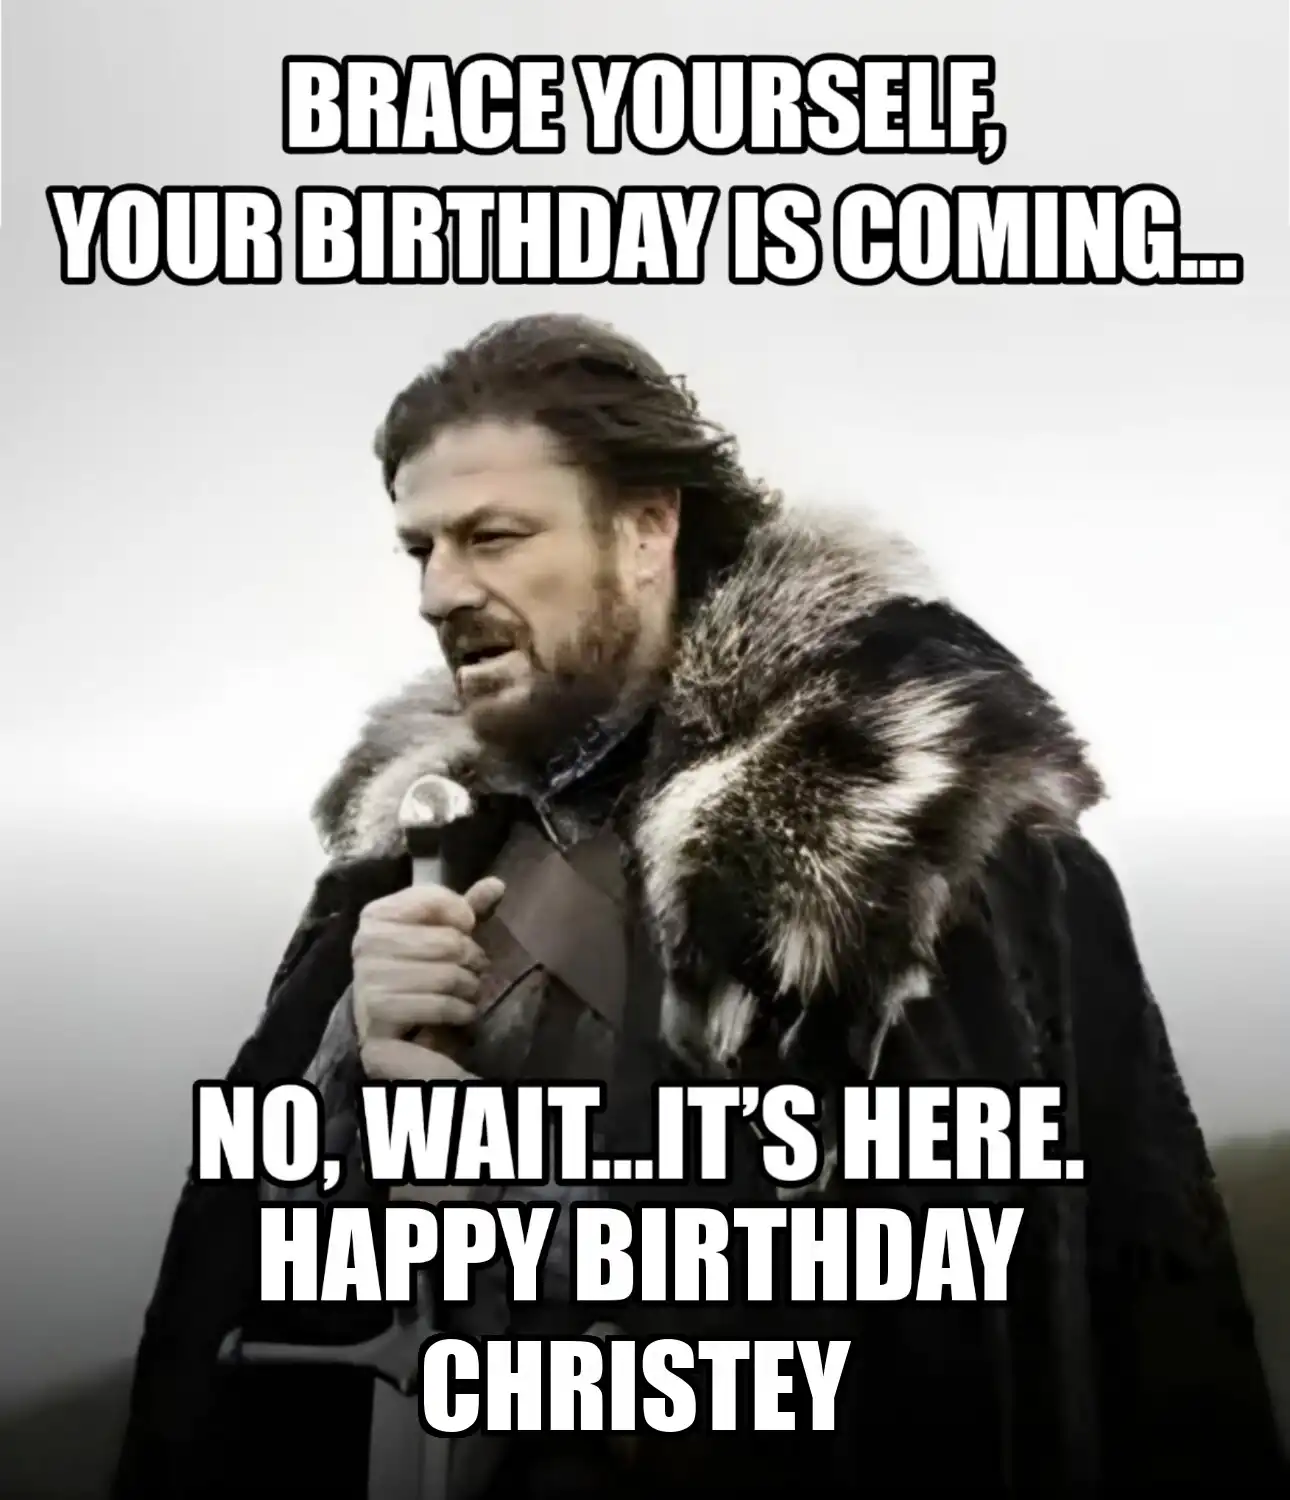 Happy Birthday Christey Brace Yourself Your Birthday Is Coming Meme